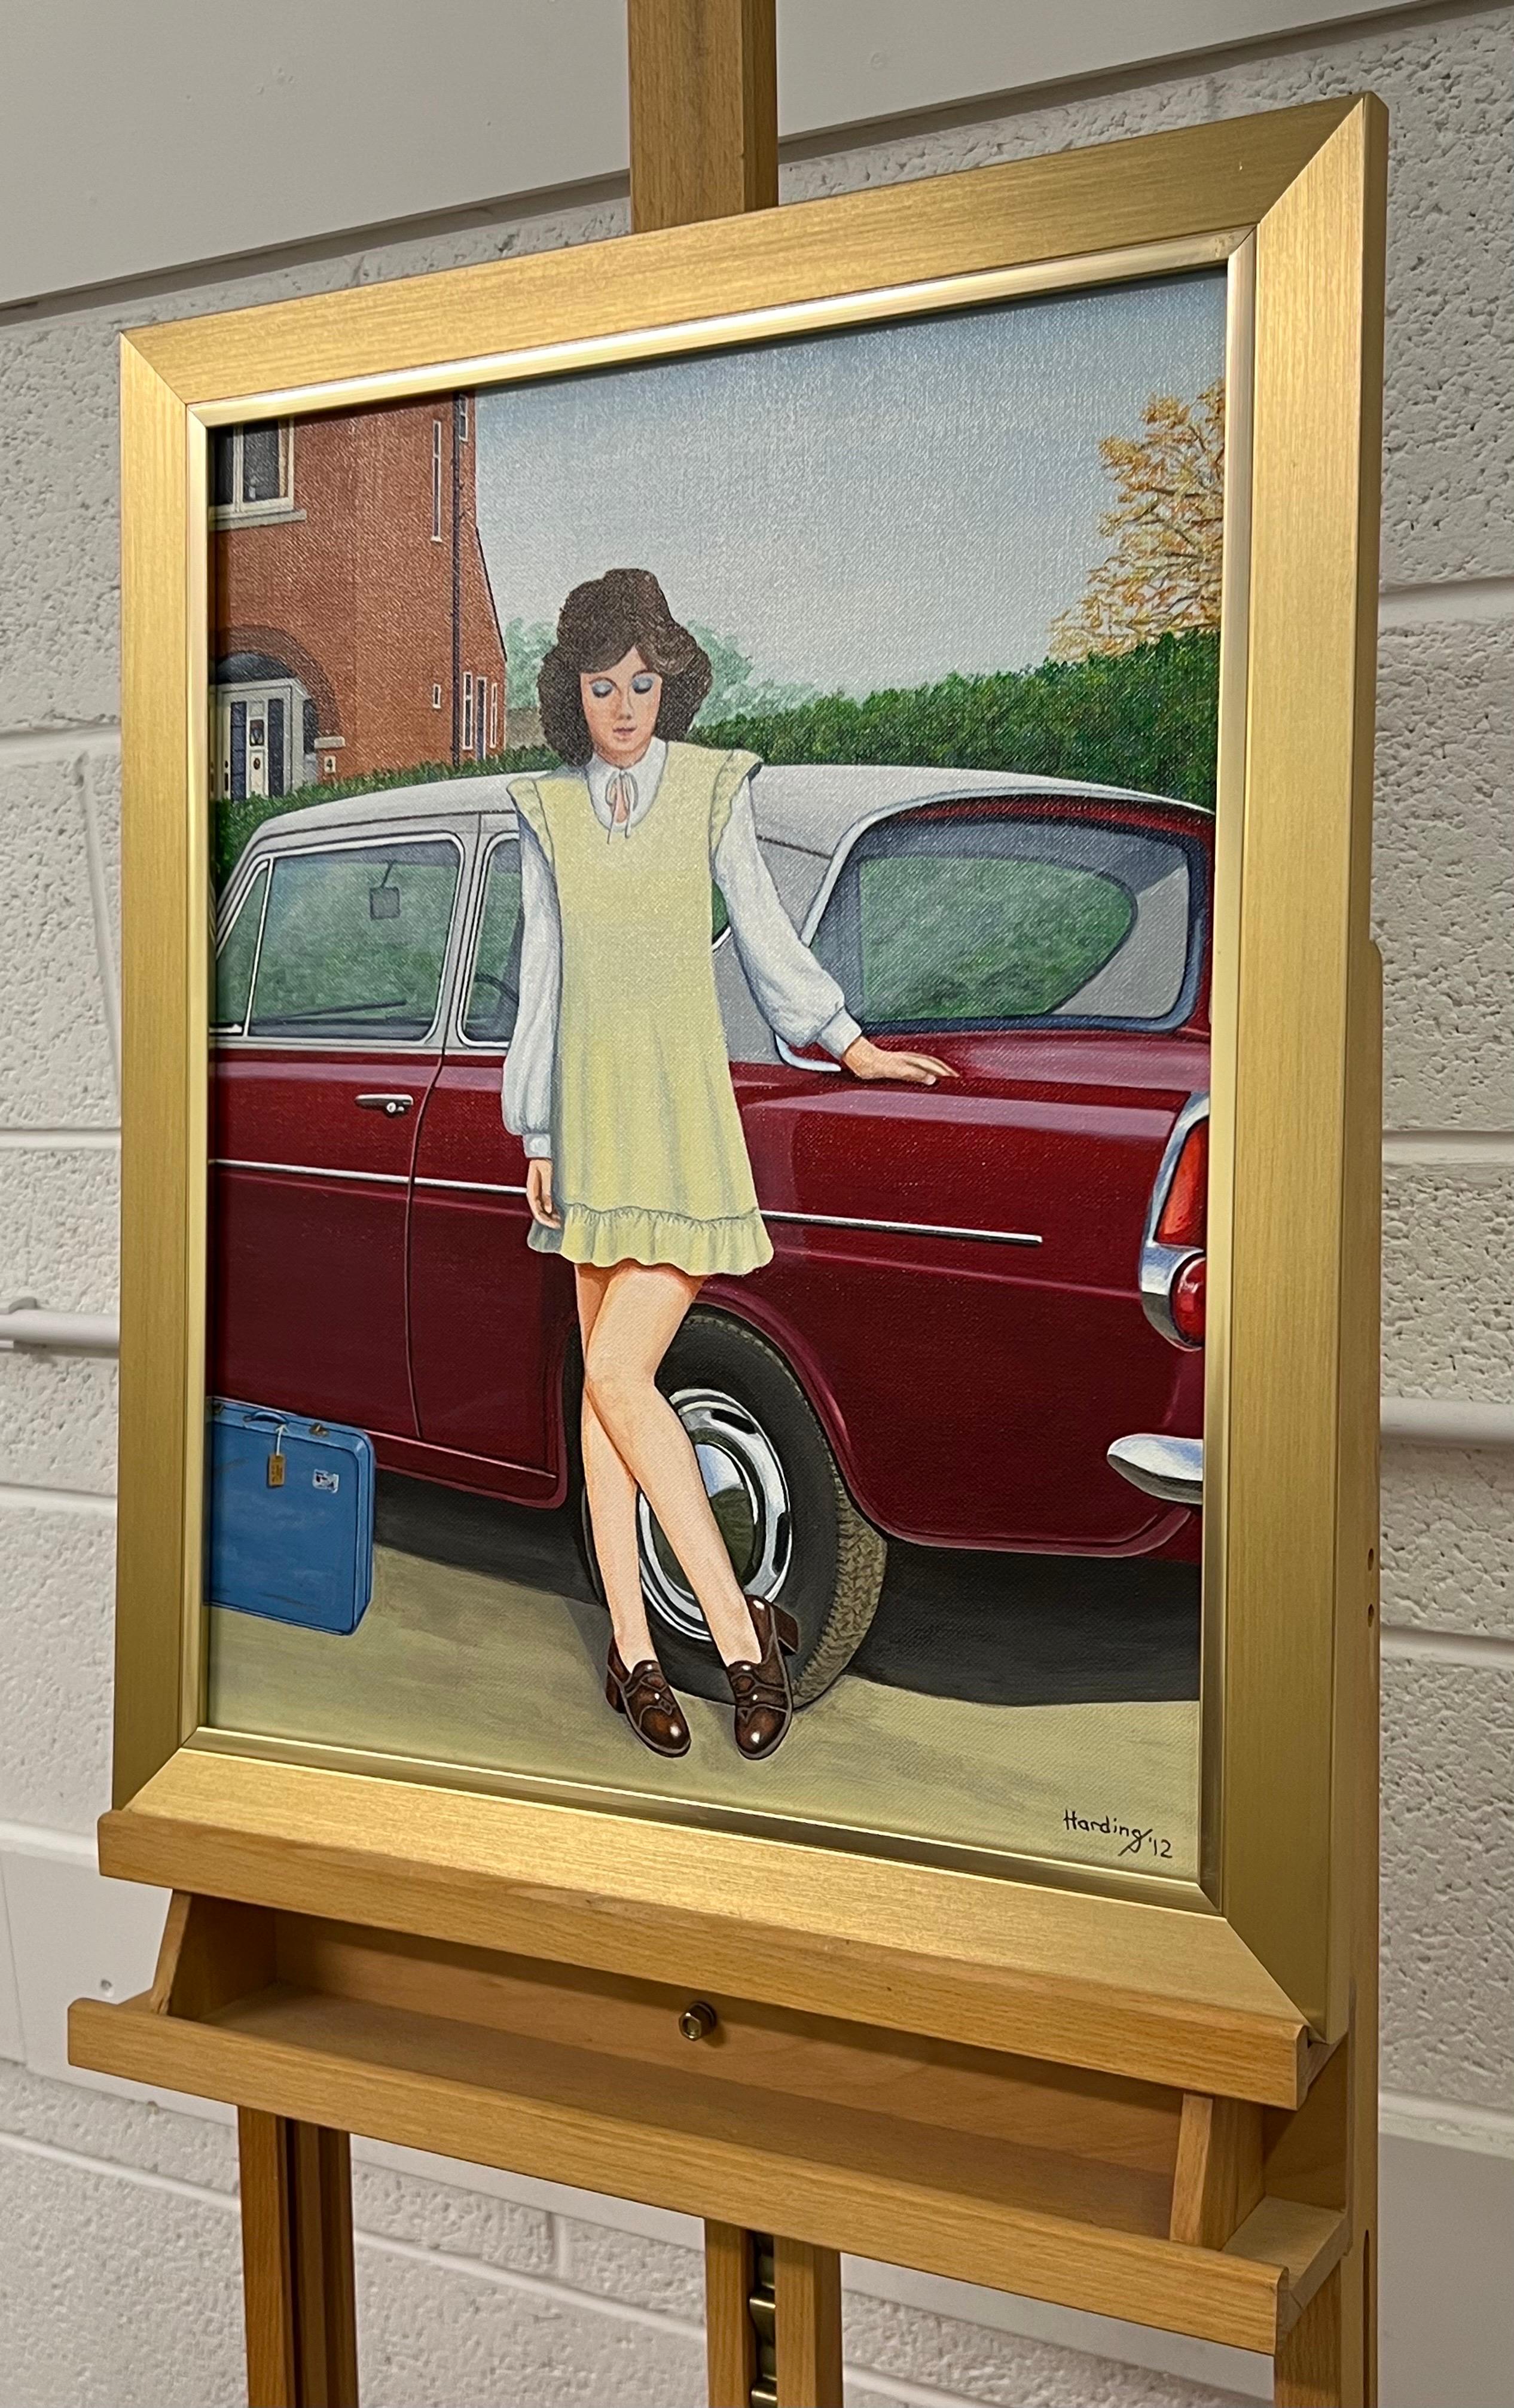 Vintage English Woman in Suburbia with Classic Ford Anglia Car 1960's 1970's England entitled ‘The Temptations Of Travel’ by Retro Nostalgic Artist, Paul F Harding. Signed, Original, Oil on Canvas. Presented in a gold frame. 


Art measures 20 x 16